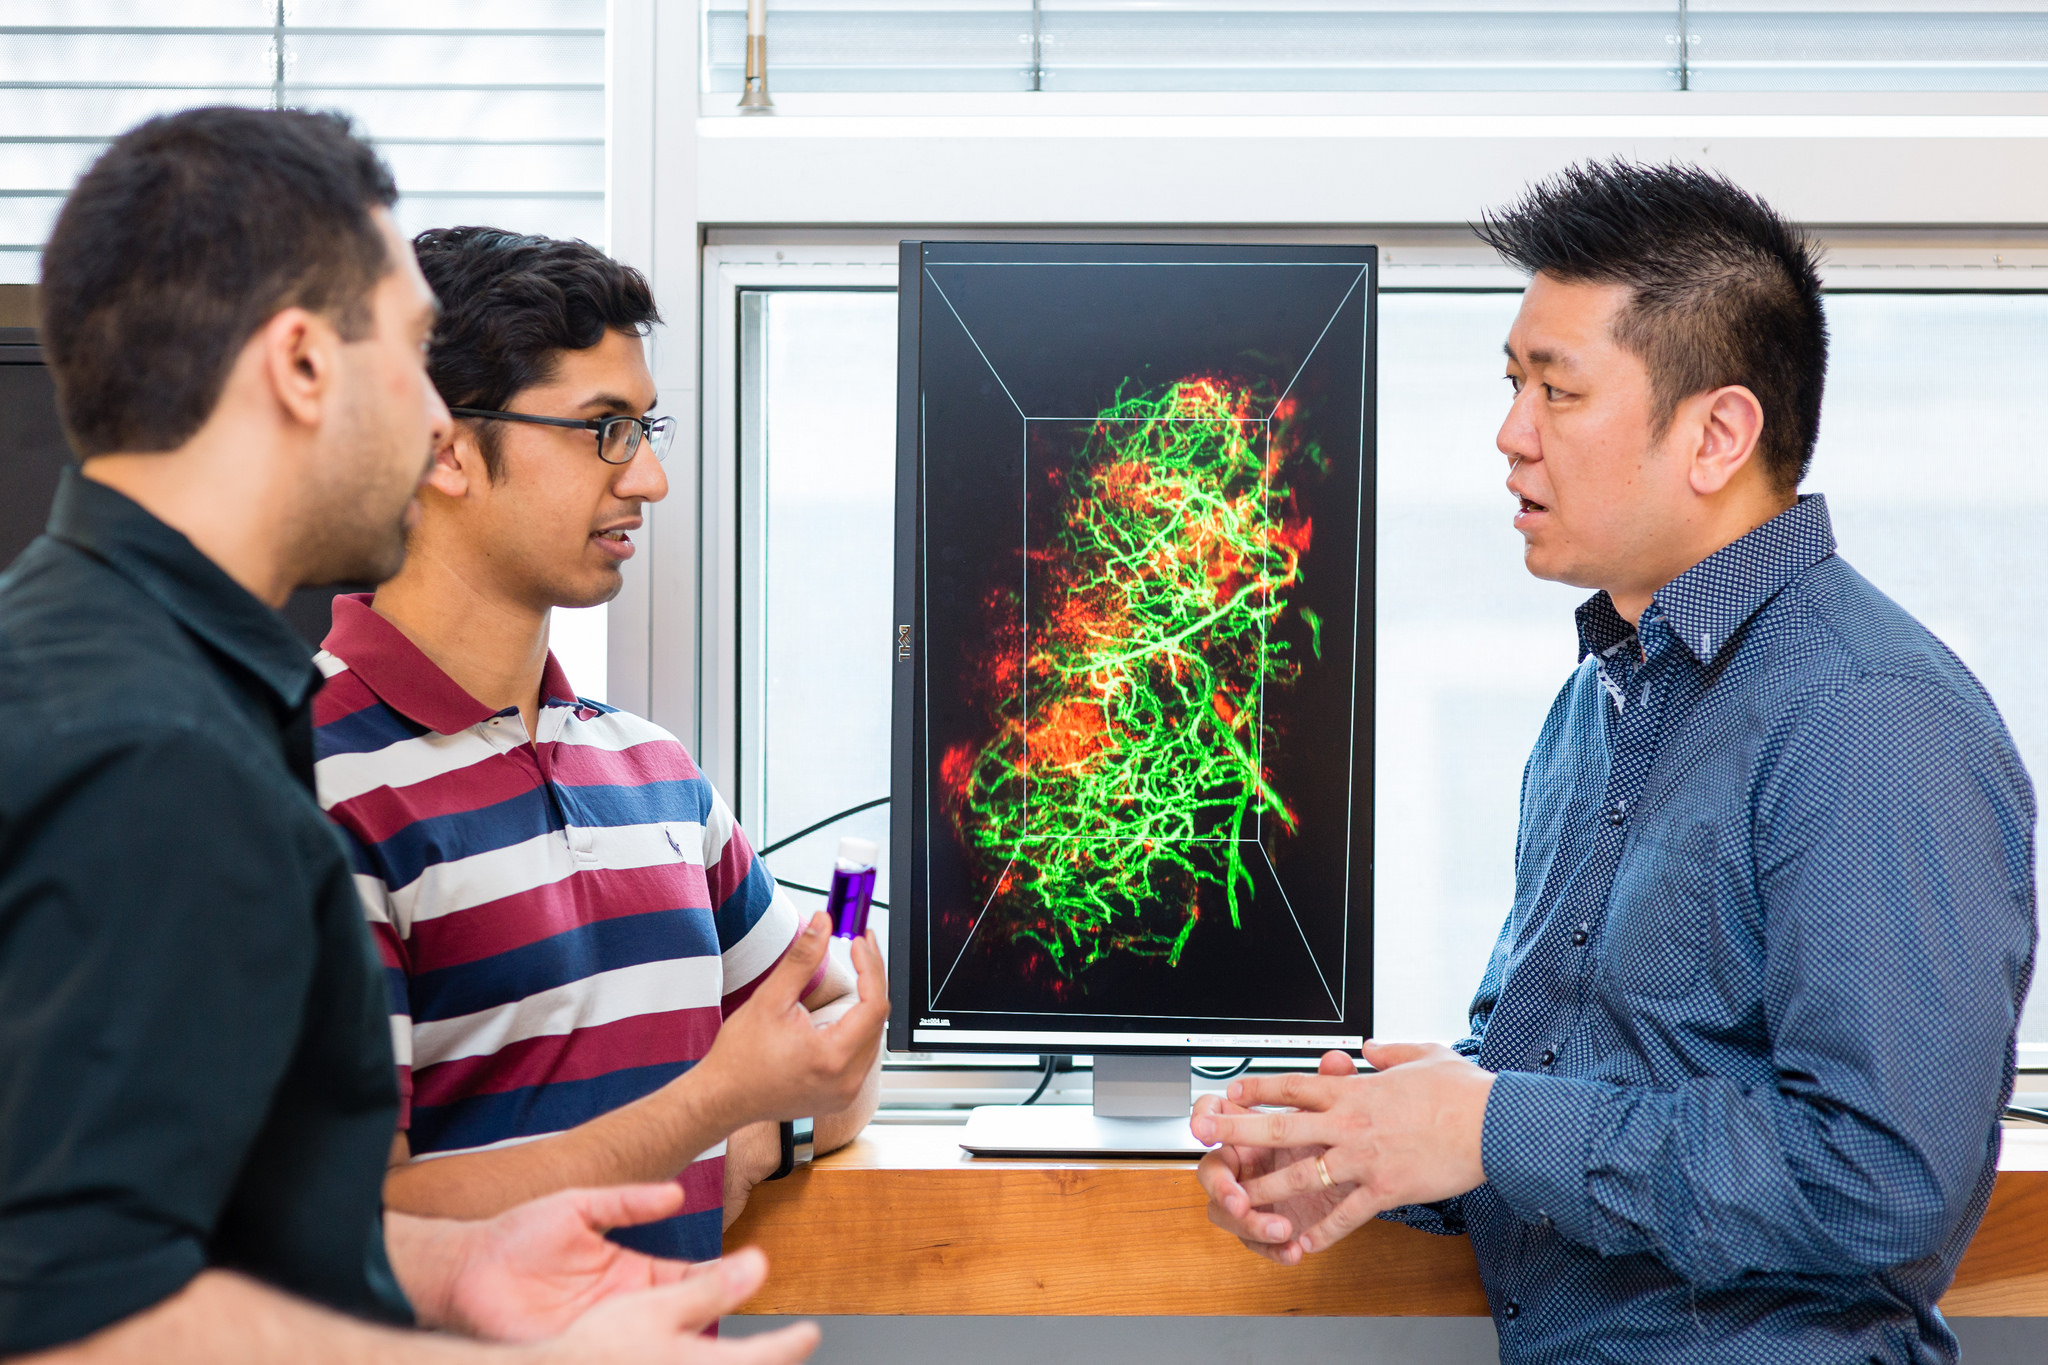 PhD candidates Abdullah Syed and Shrey Sindhwani in the lab of Professor Warren Chan (right)